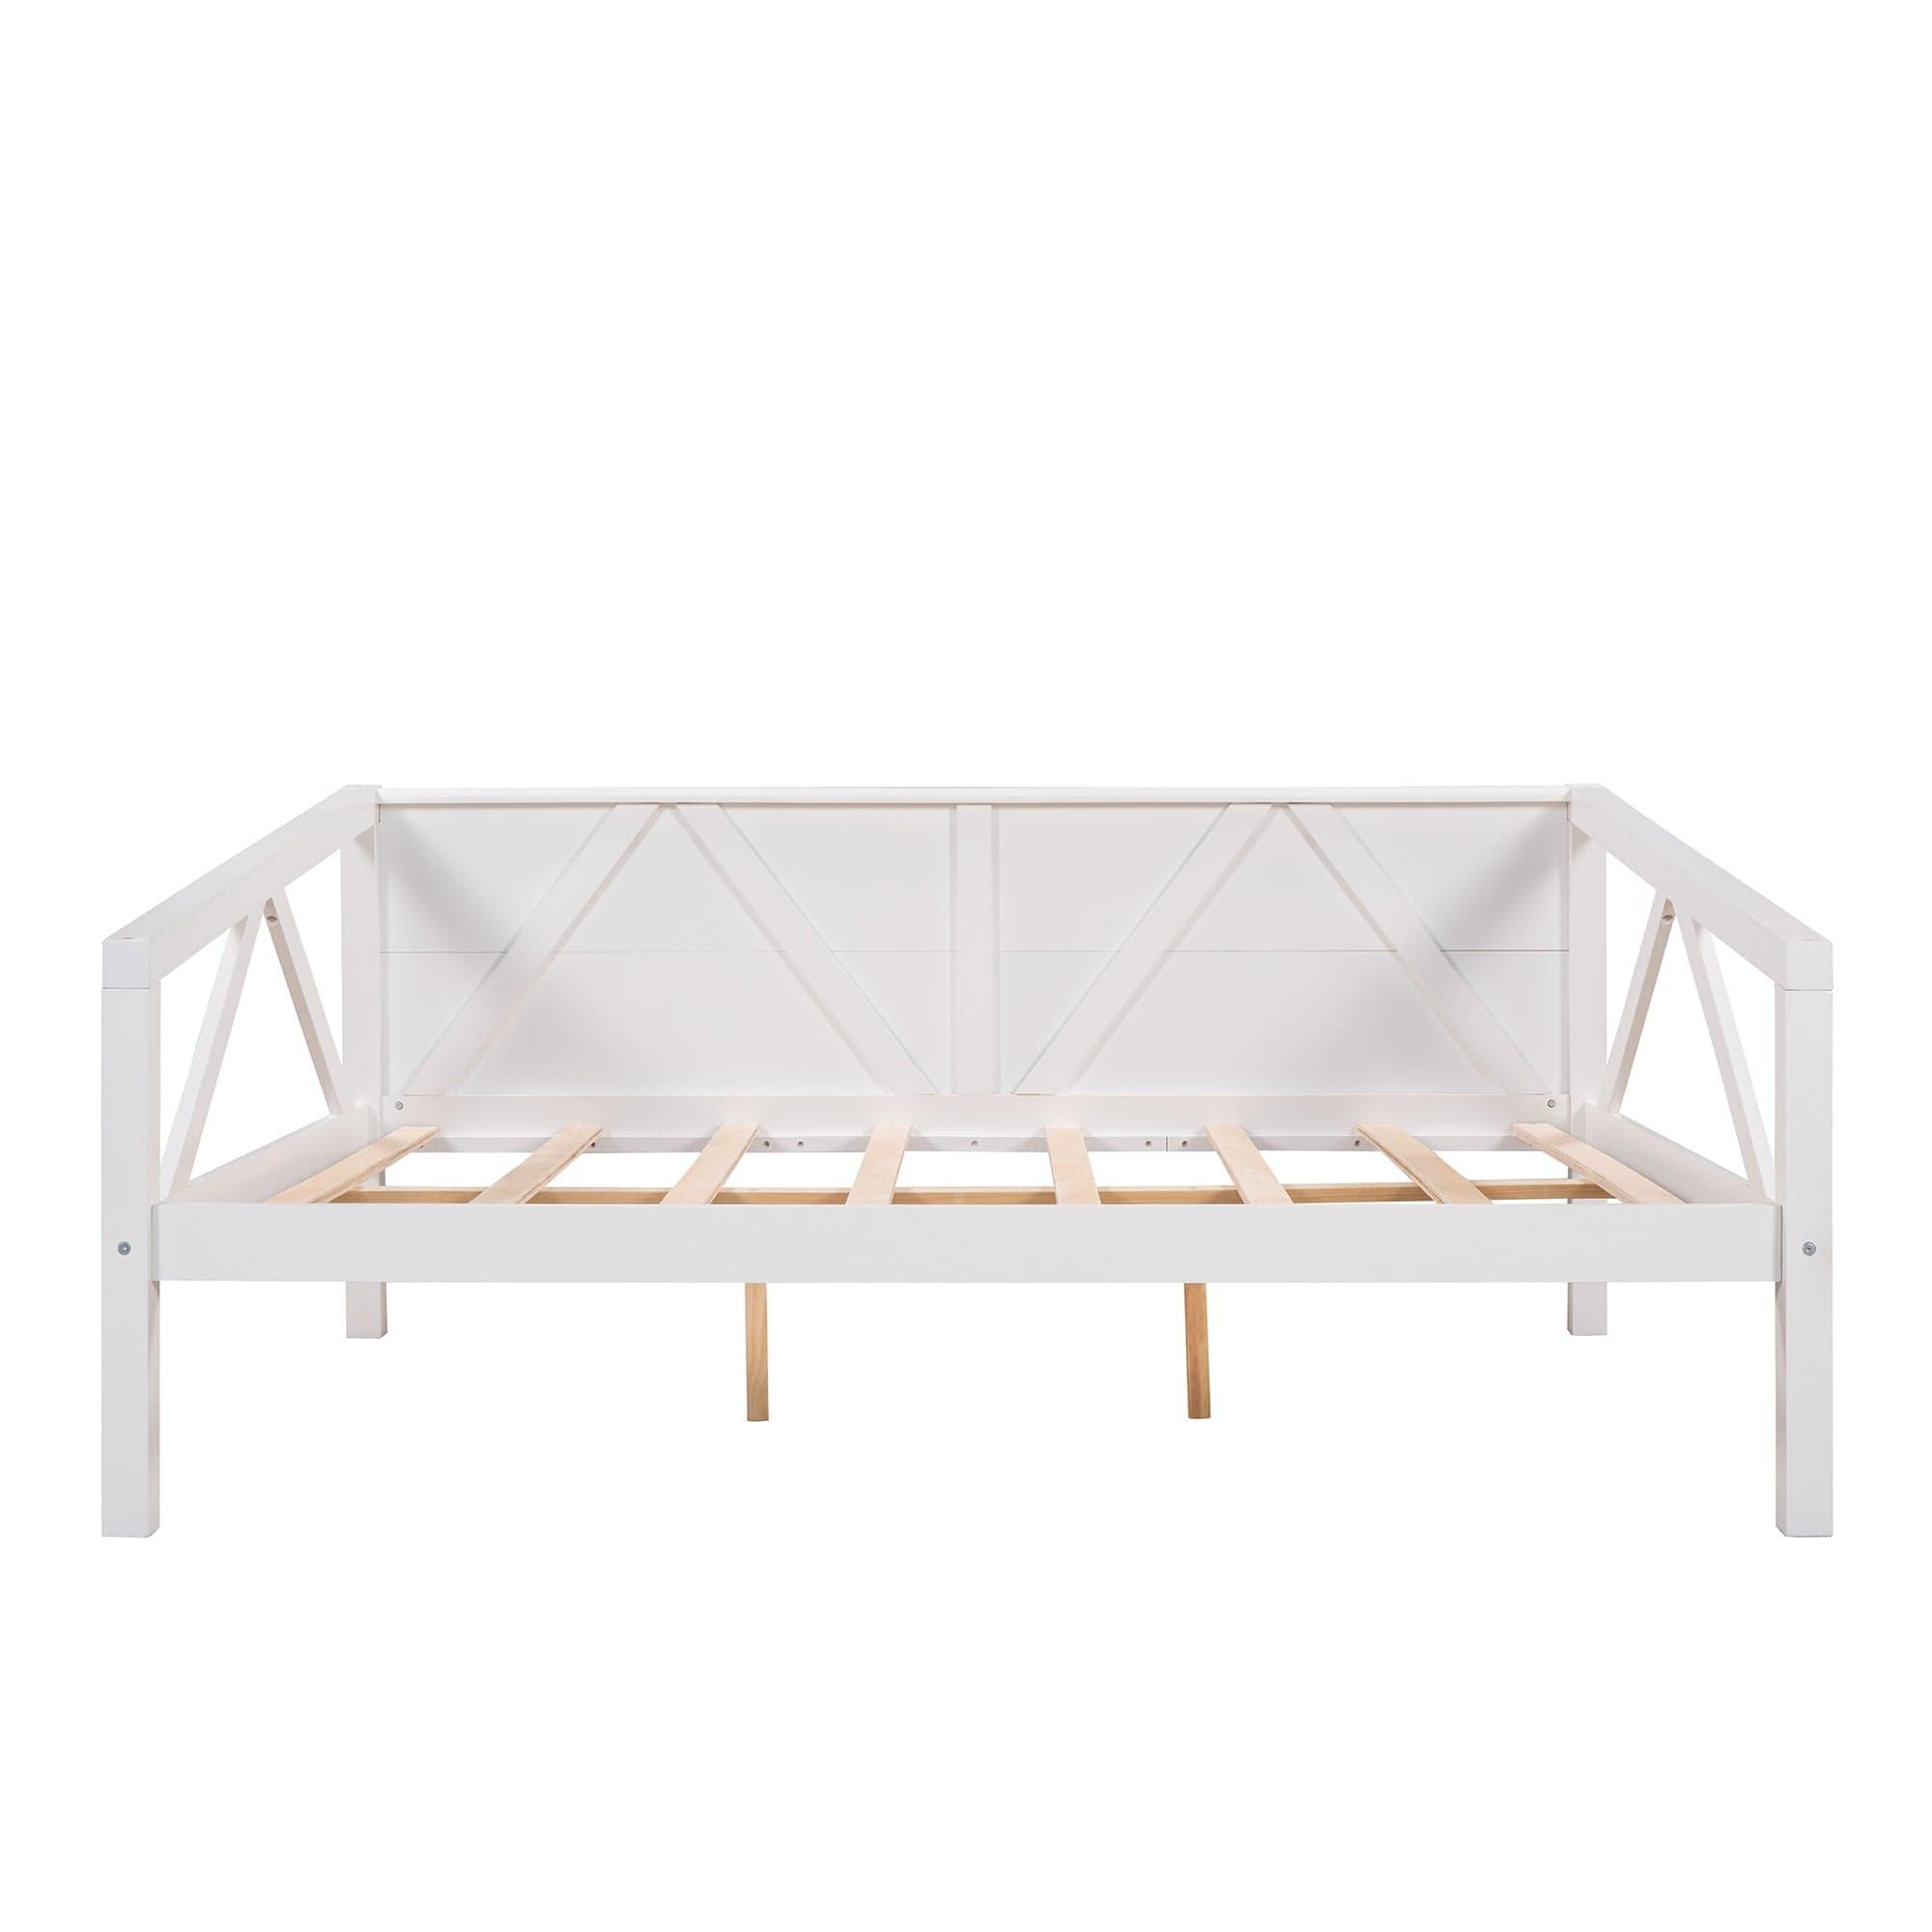 Shop Full size Daybed, Wood Slat Support, White Mademoiselle Home Decor